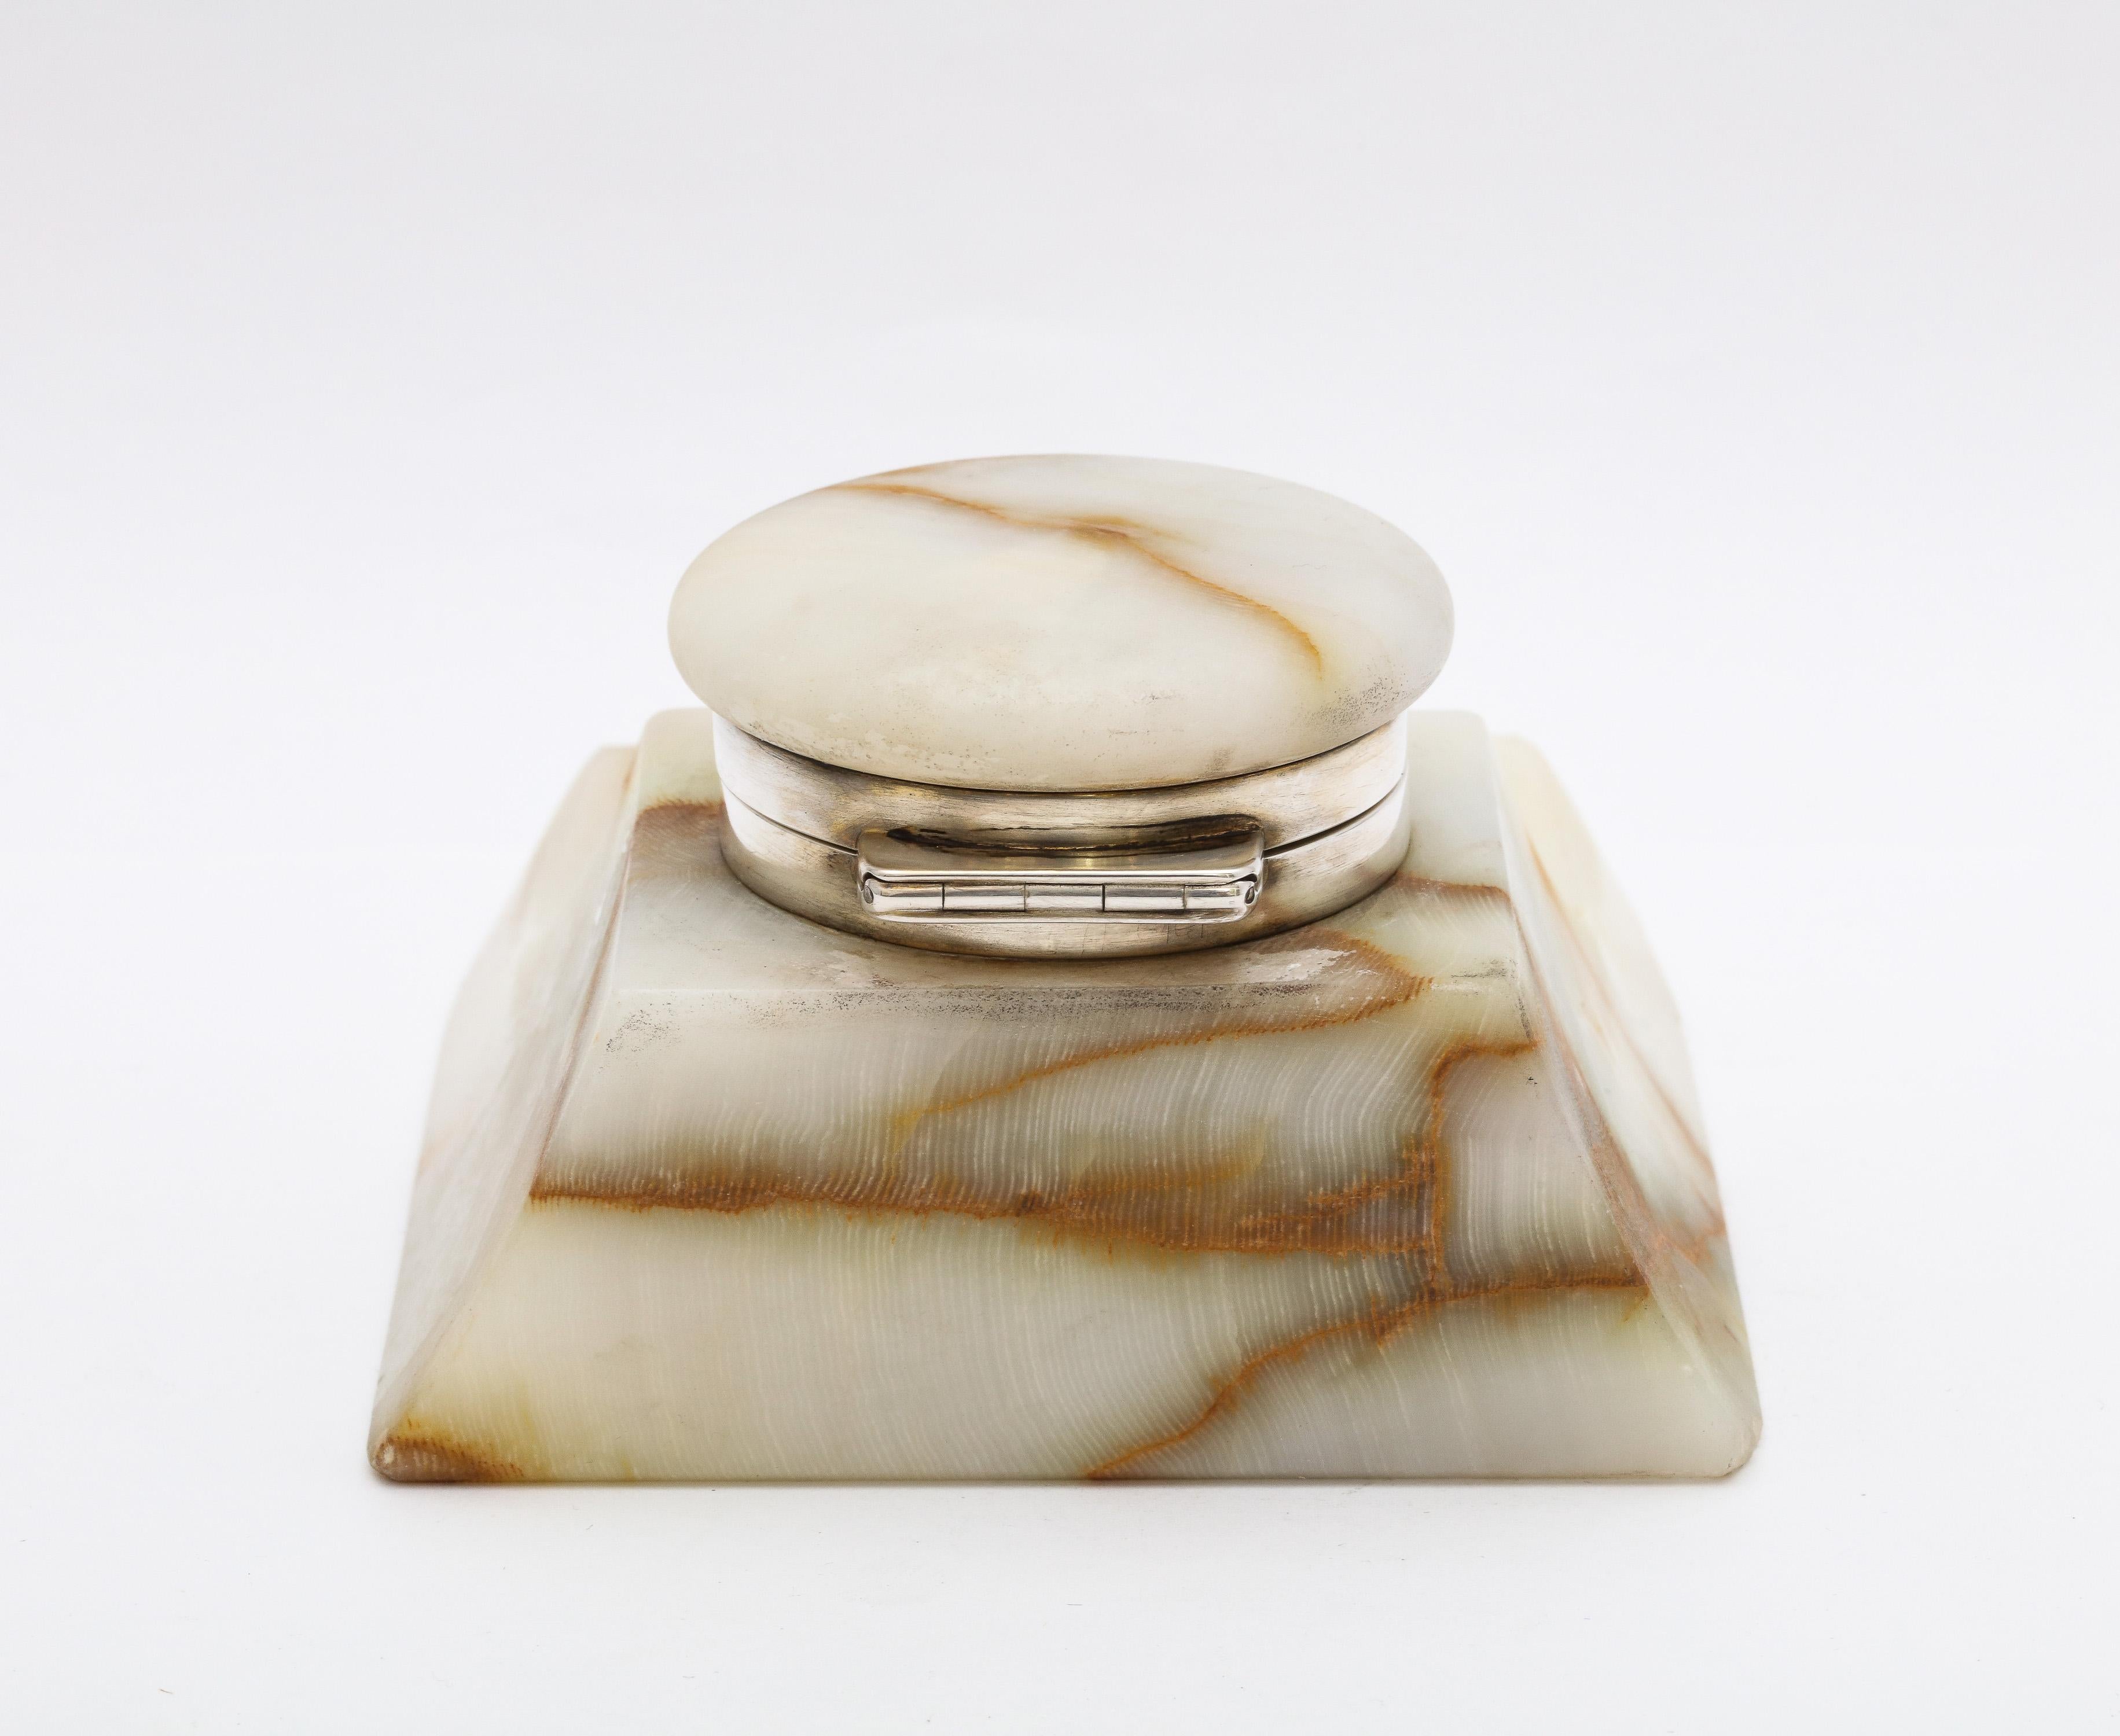 Edwardian Sterling Silver-Mounted Onyx Inkwell For Sale 1